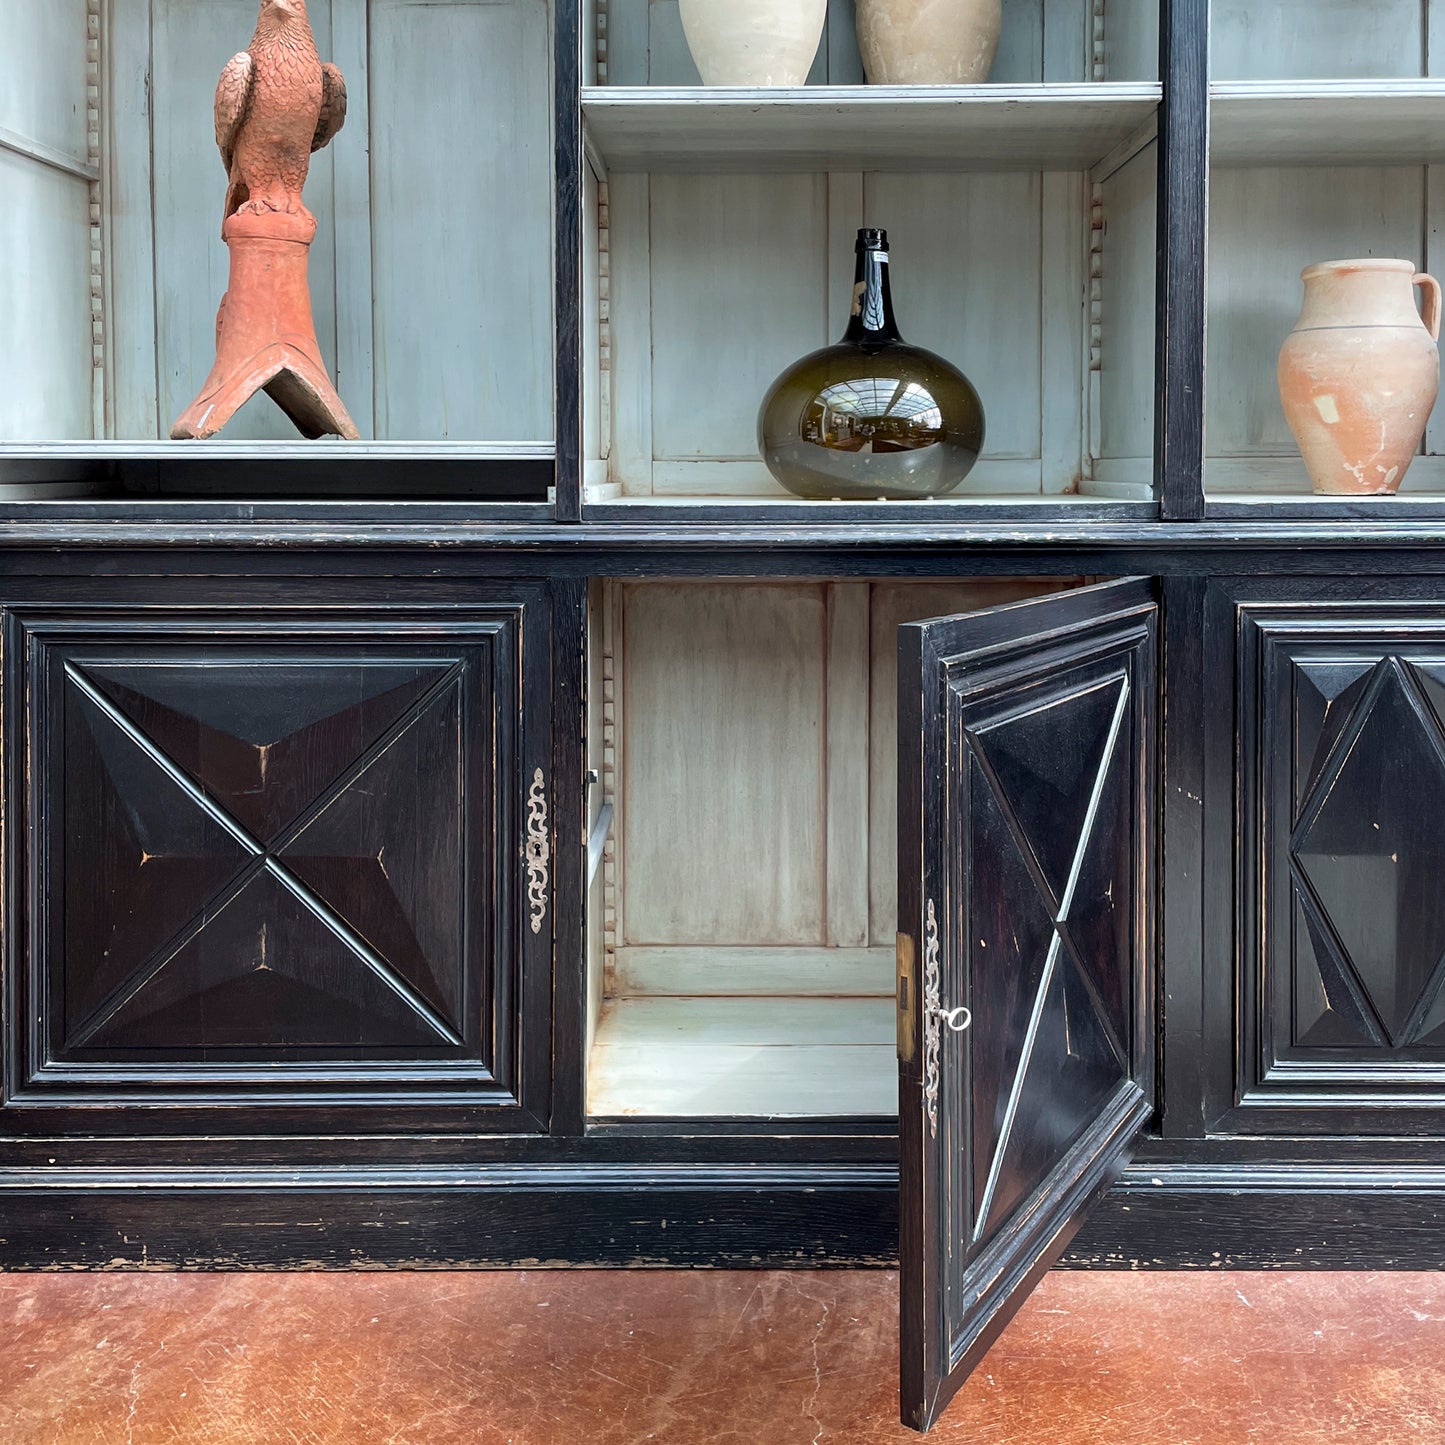 Large Painted Display Cabinet